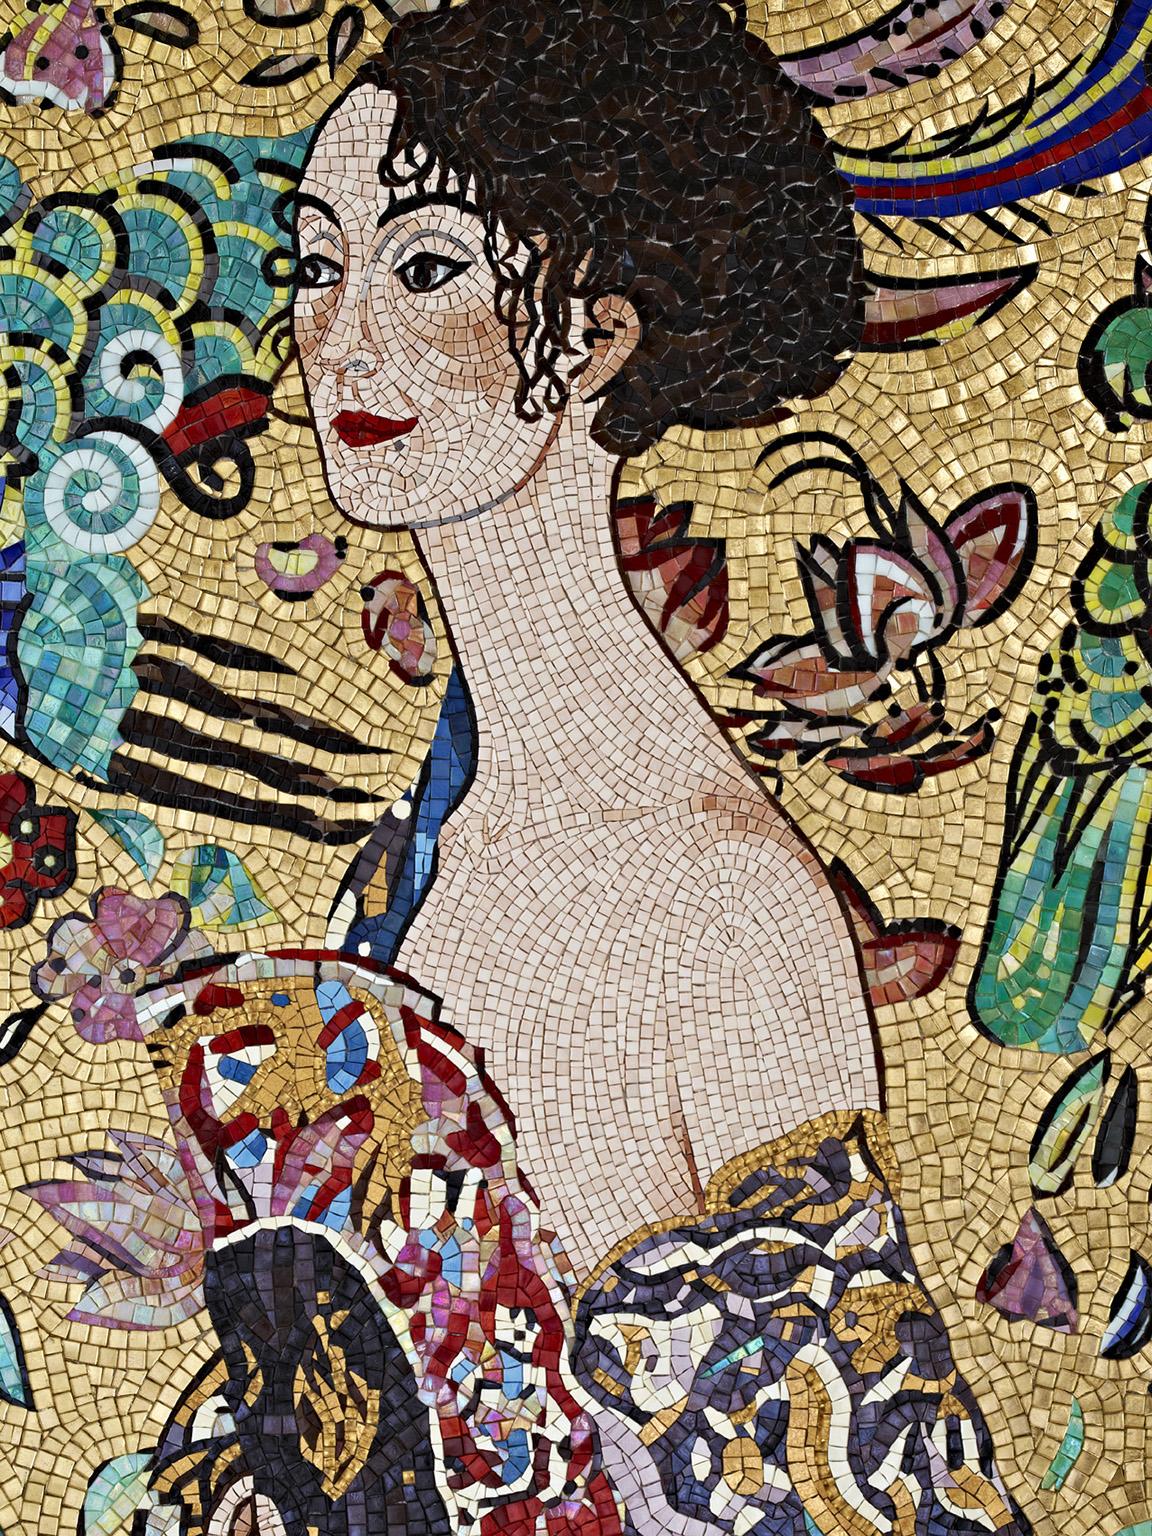 Making Artistic Mosaic, design of unparalleled beauty, inventing ' tromp l'oeil' thanks to the endless colors of the glass mosaic collections, all this allowed us to produce and divulge in all the world the preciousness of the mosaic as an